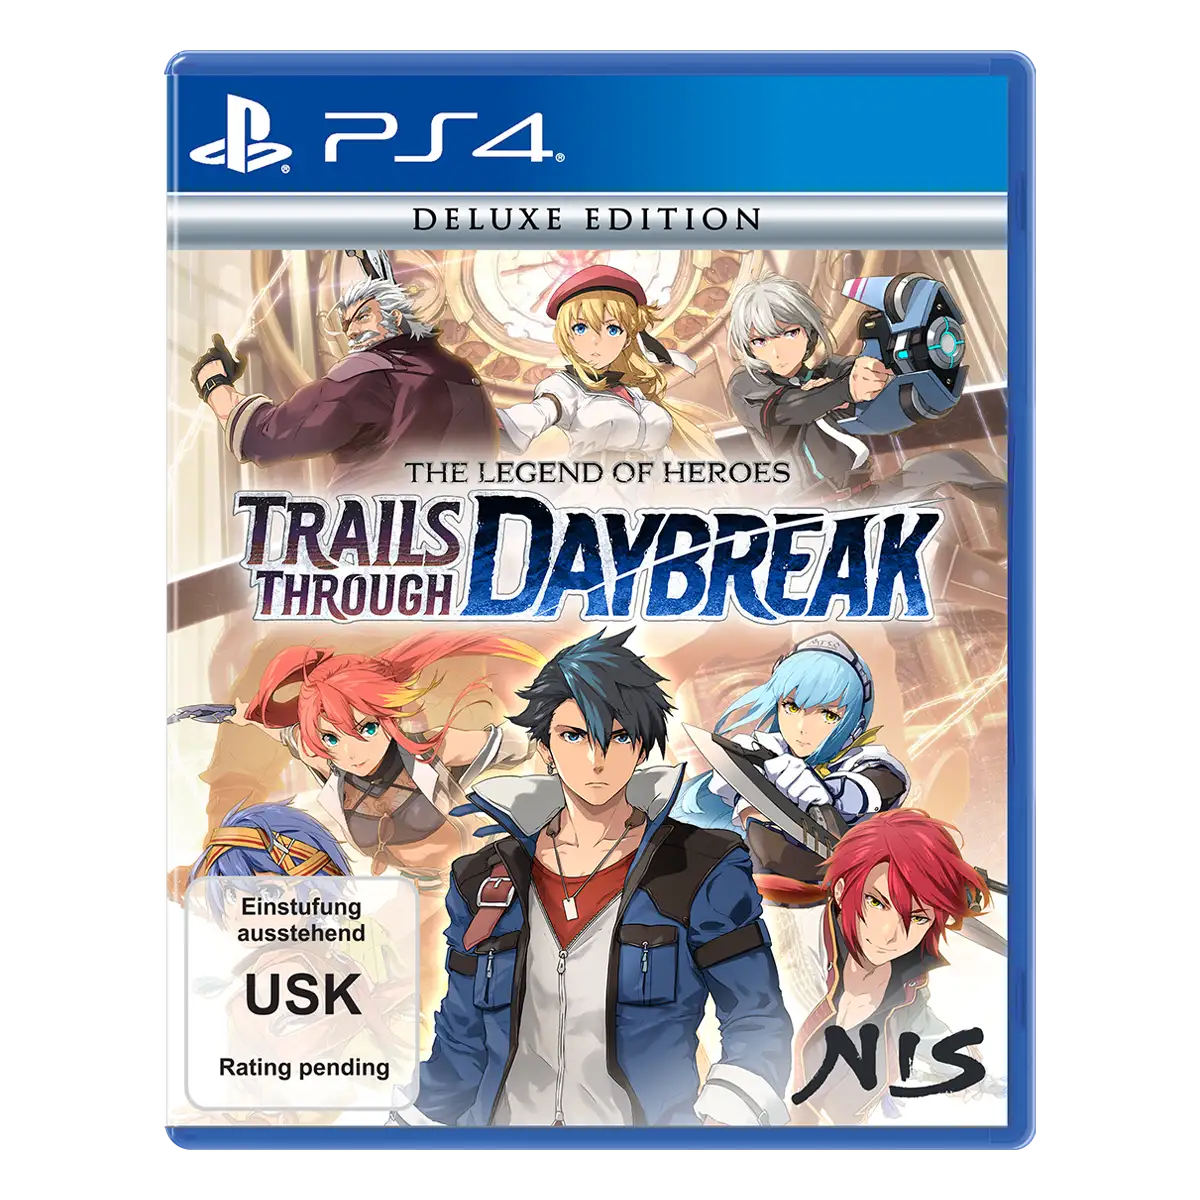 The Legend of Heroes: Trails through Daybreak - Deluxe Edition (PS4)